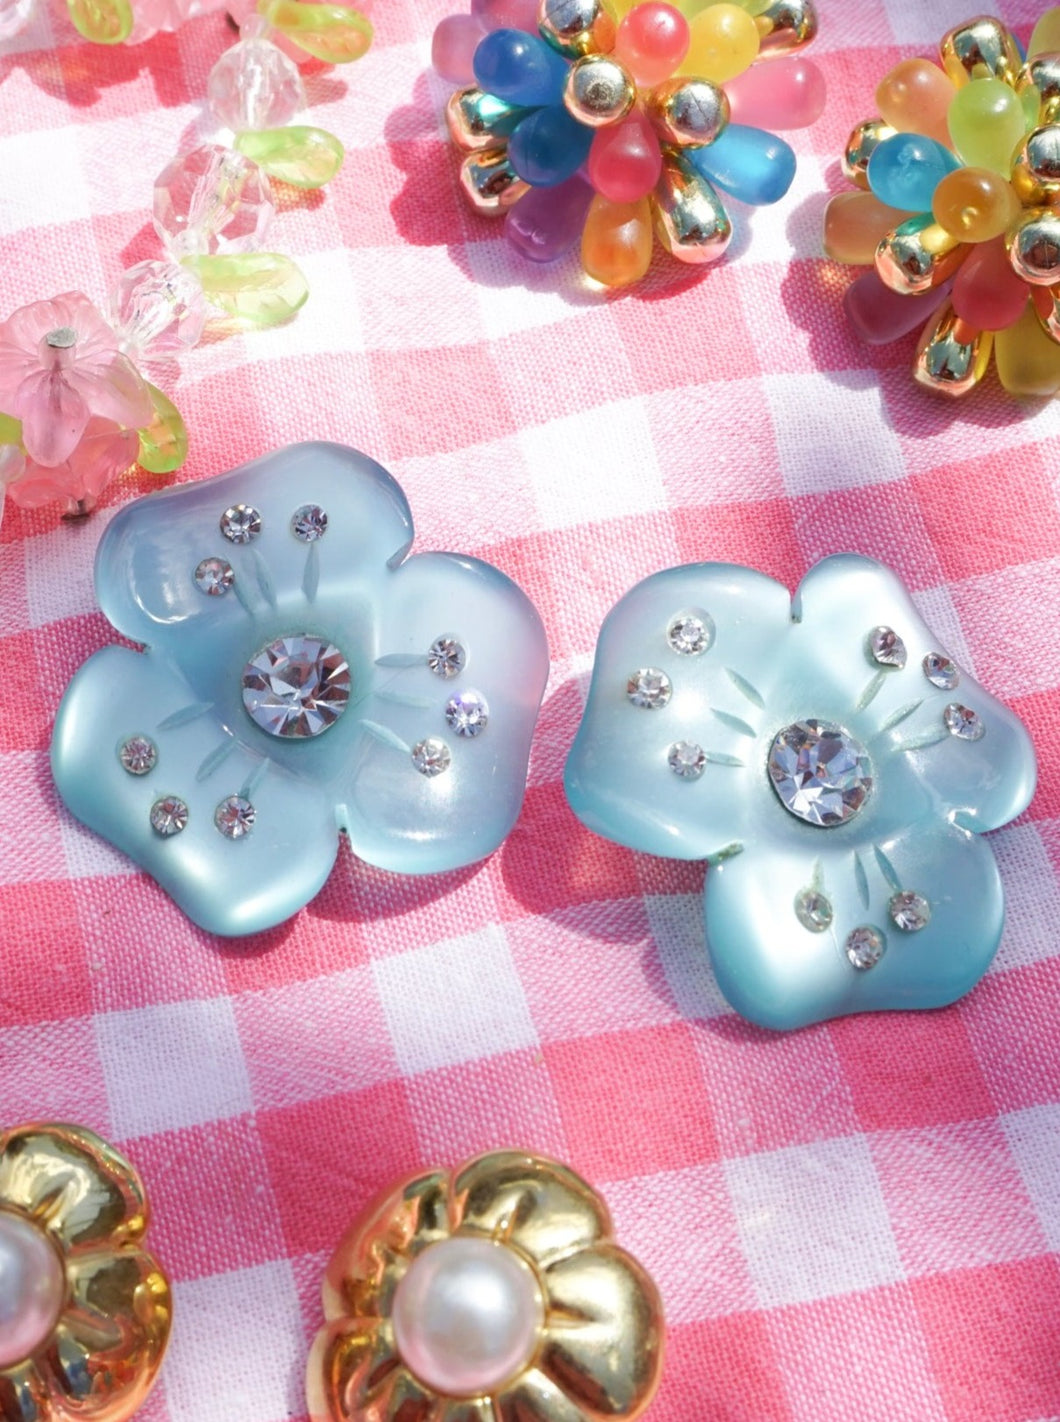 Max clip blue flowers and rhinestos